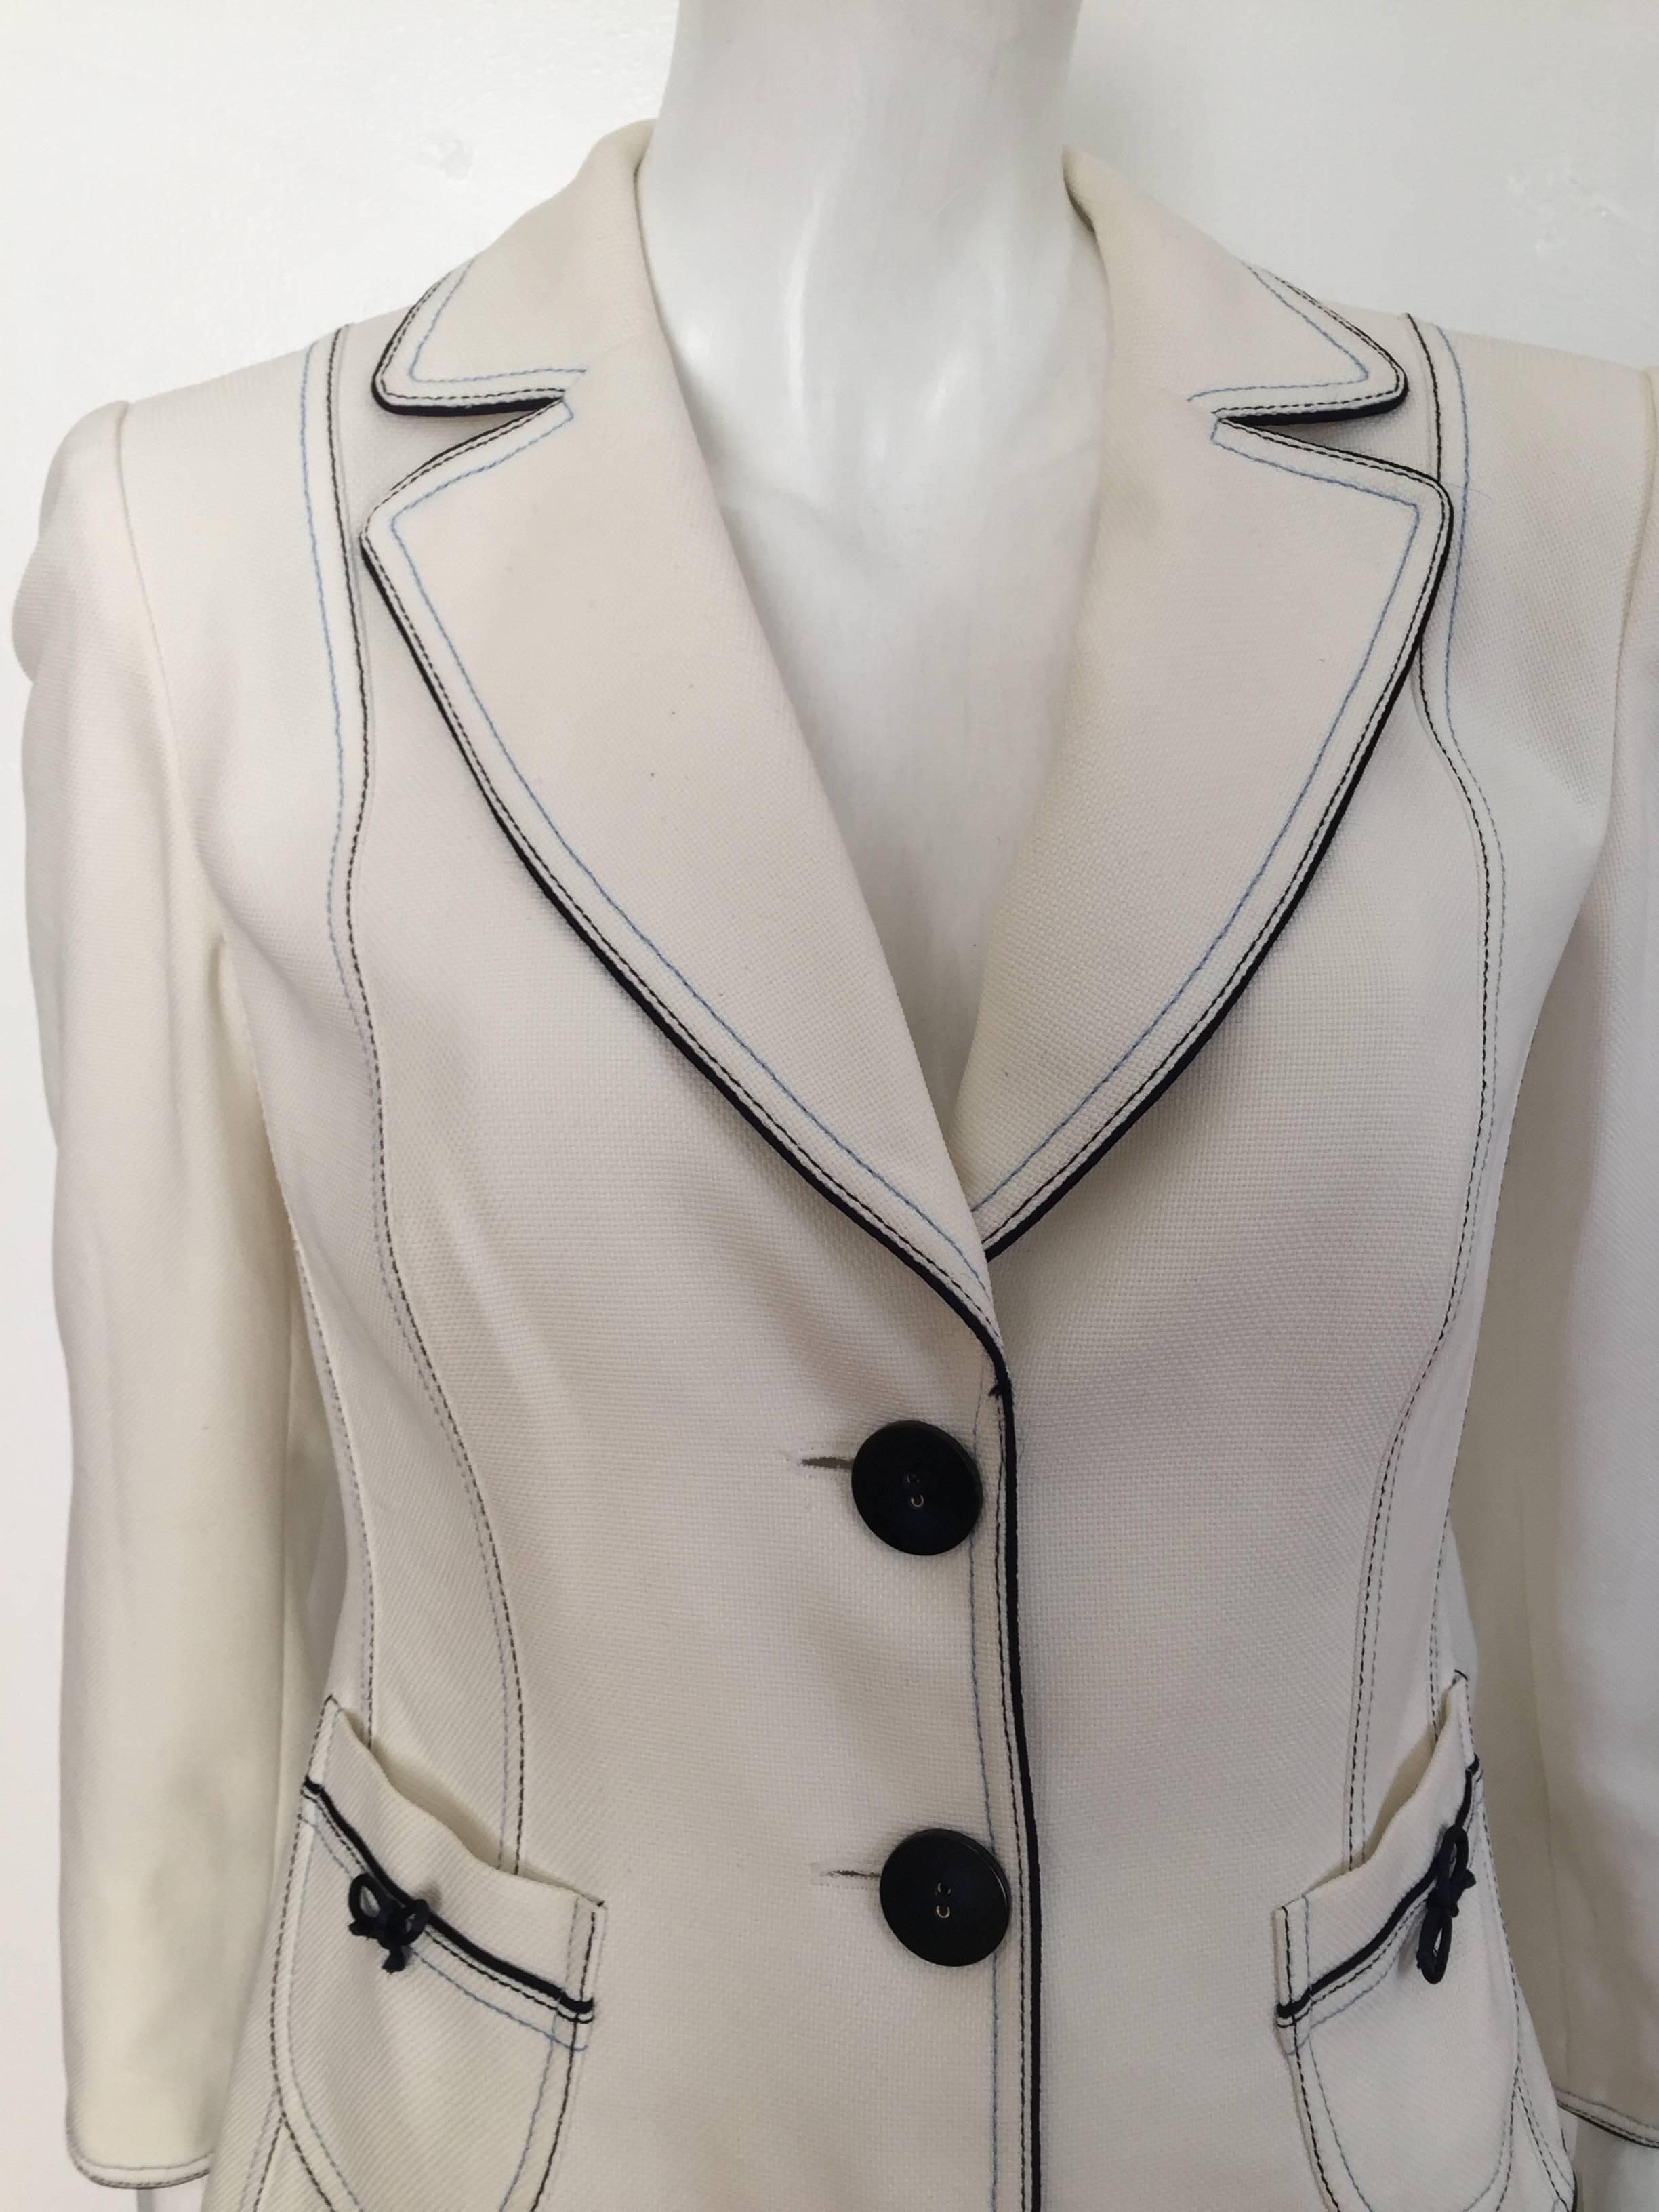 Biba 1990s white cotton jacket is a French size 40 but fits like a USA size 6 (please see & use the measurements below so that you may properly measure your lovely body to make certain this will fit you to perfection). 
Mild shoulder pads.
Two